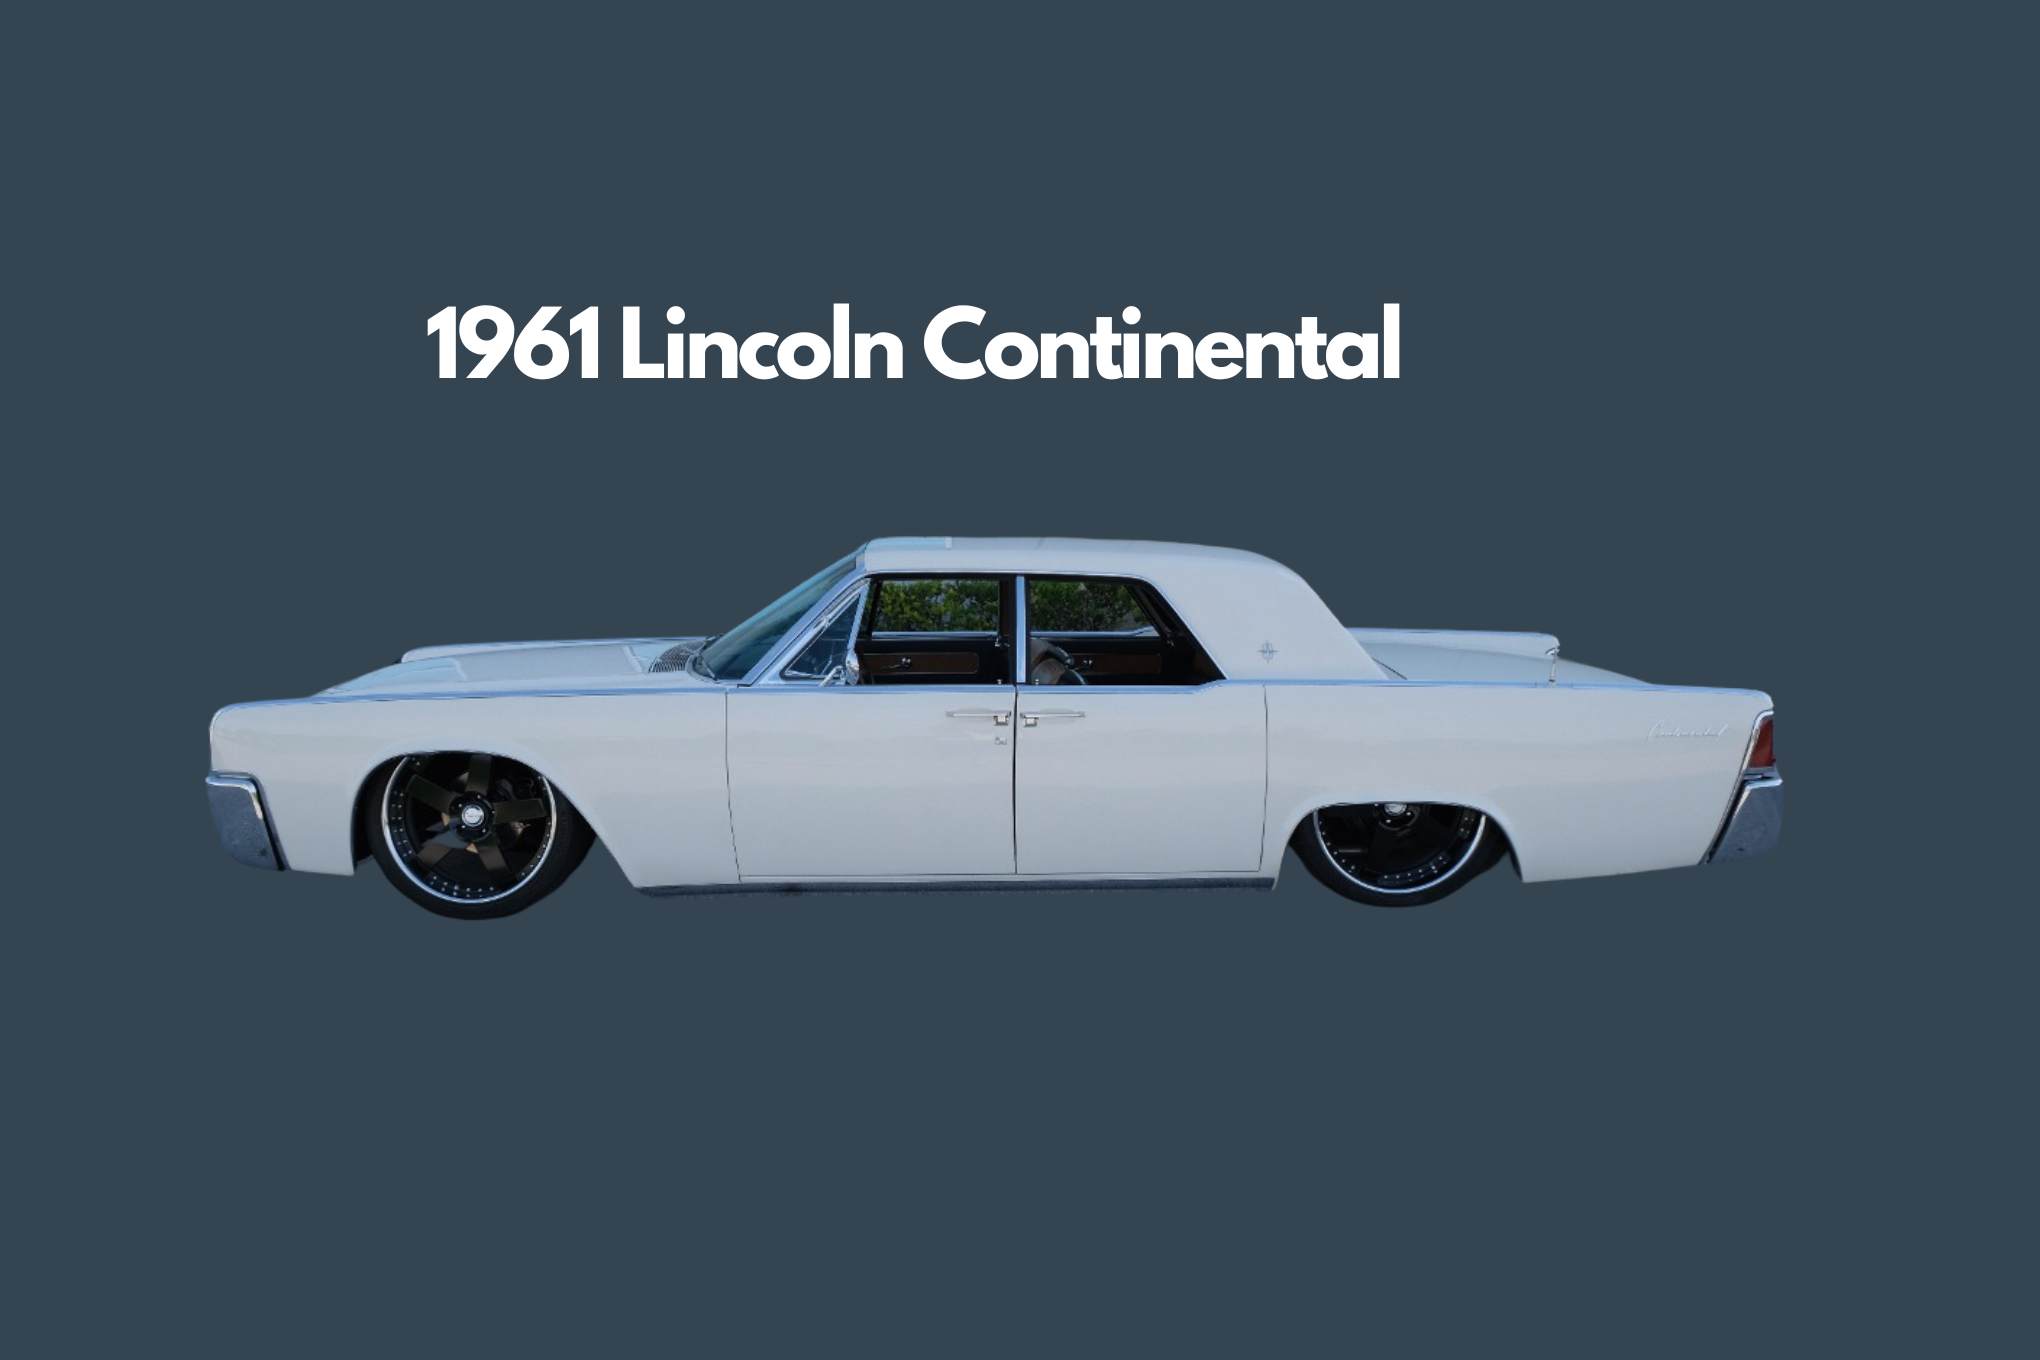 The 1961 Lincoln Continental: A Legacy of Elegance and Innovation